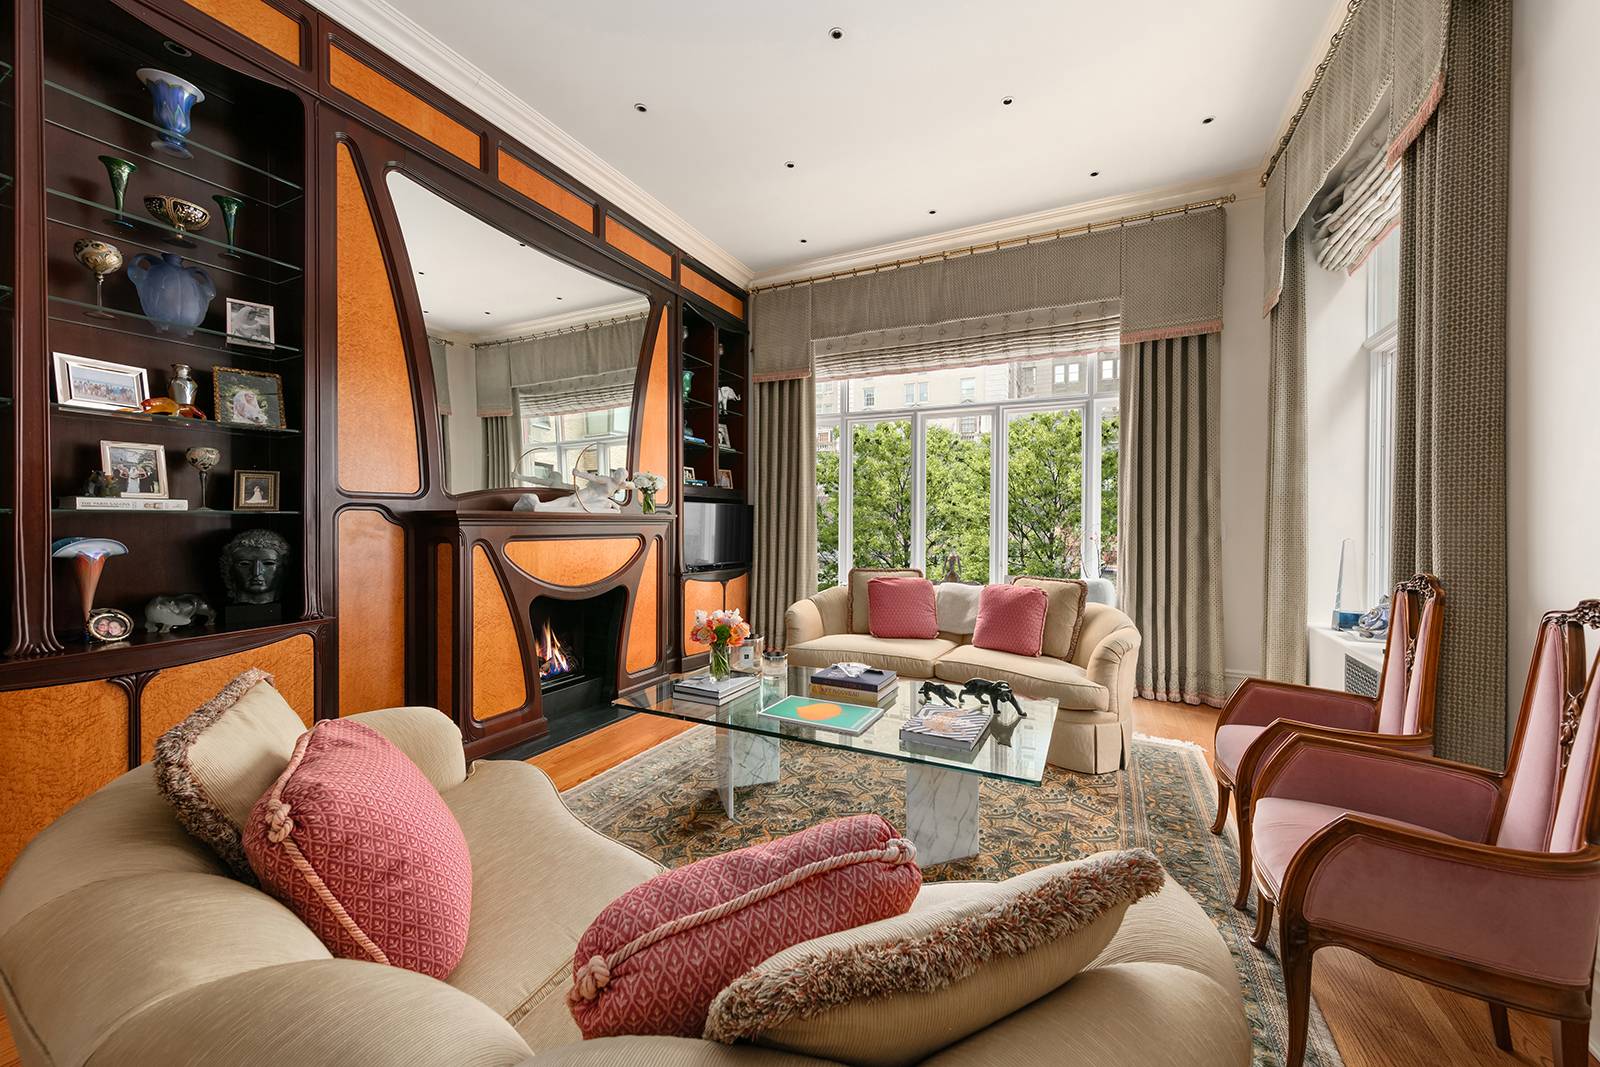 Enviably located on a prime Upper East Side block known for its beautiful townhouses, this exquisite two bedroom, two and half bathroom duplex boasts spectacular proportions and a rarely seen ...